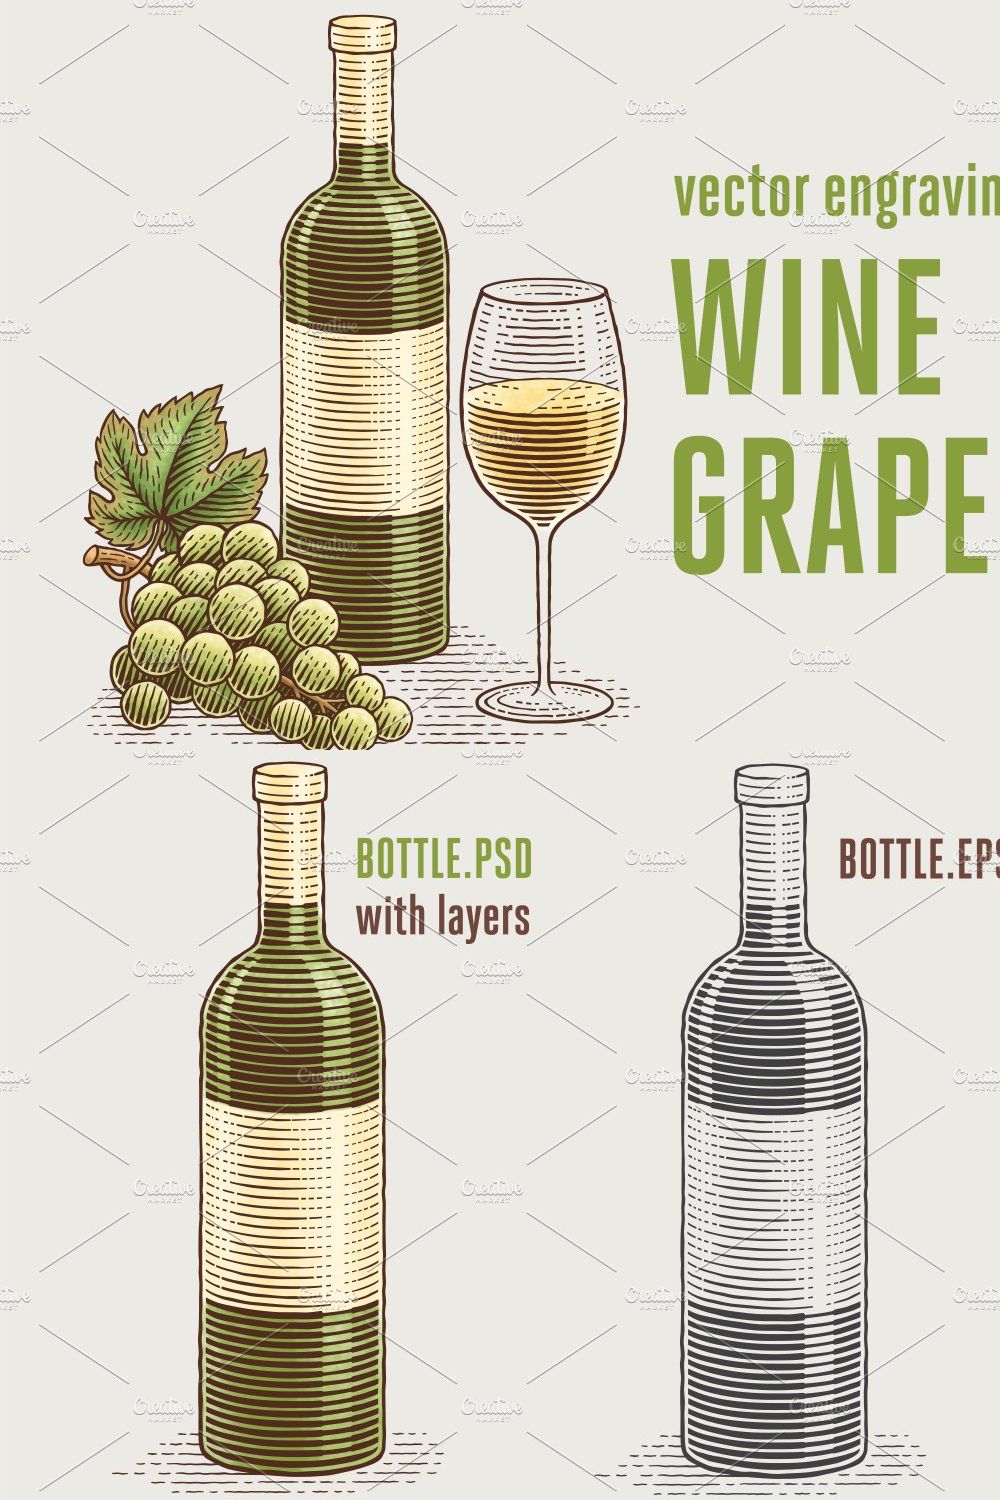 Wine and grape pinterest preview image.